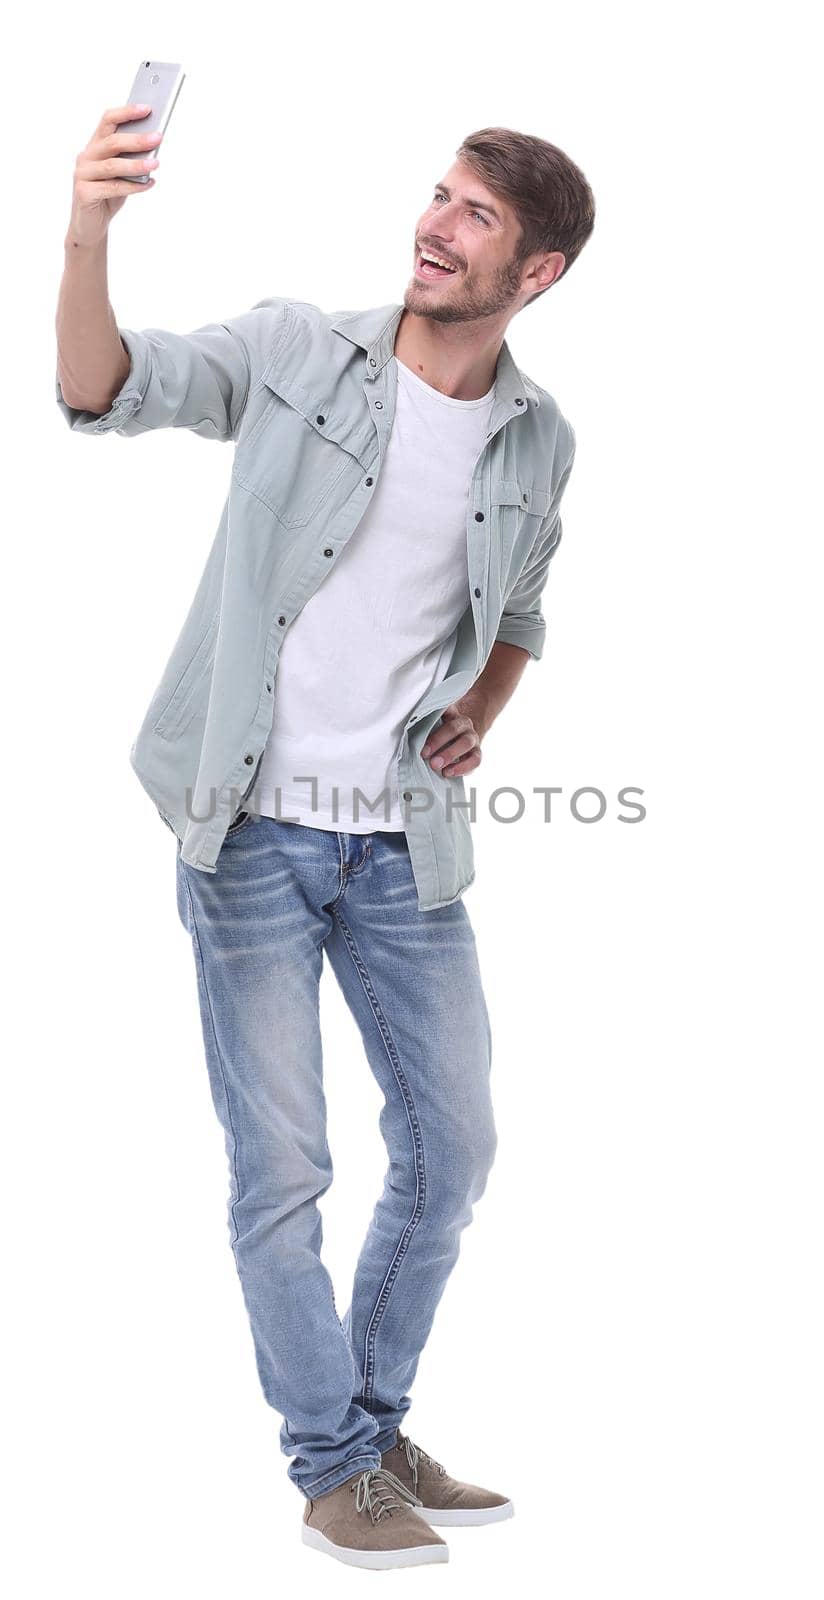 in full growth.smiling young man taking selfie.isolated on white background.